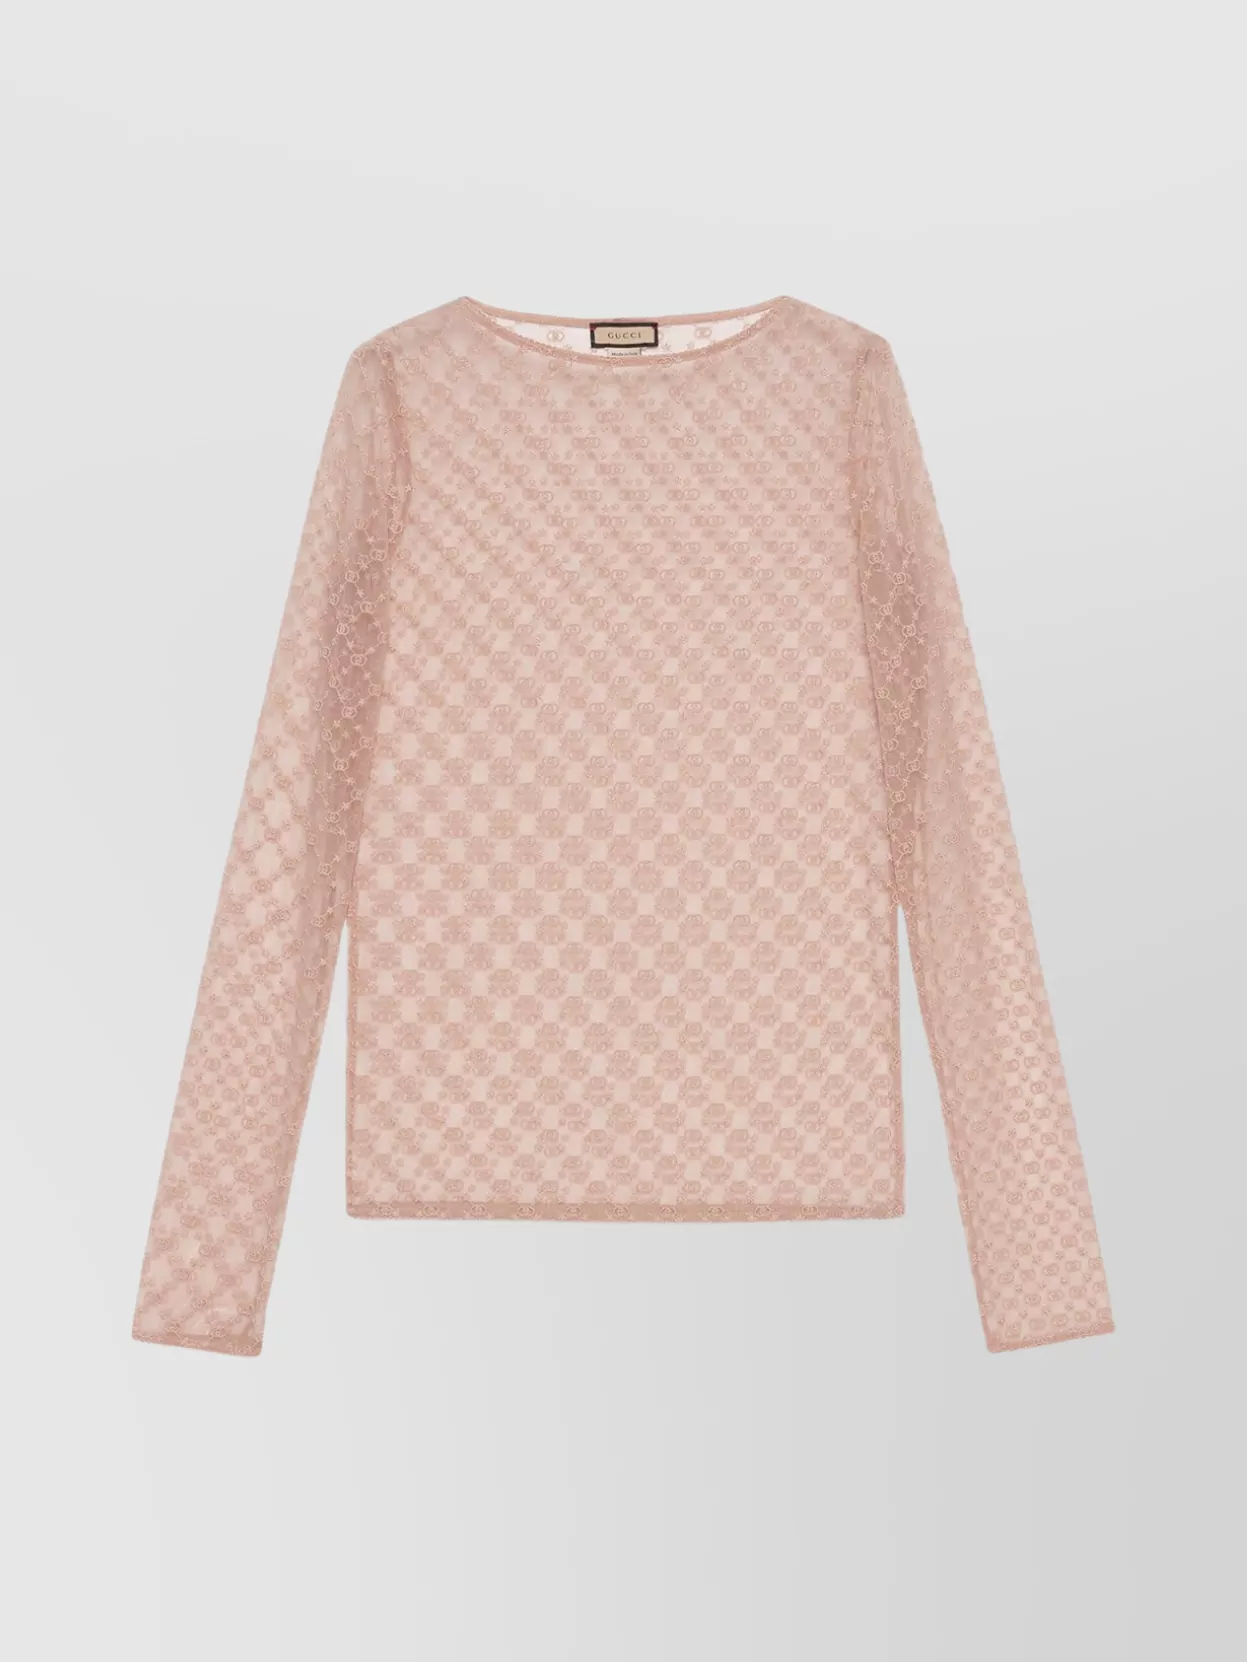 Shop Gucci Sheer Gg Star Embroidered Top